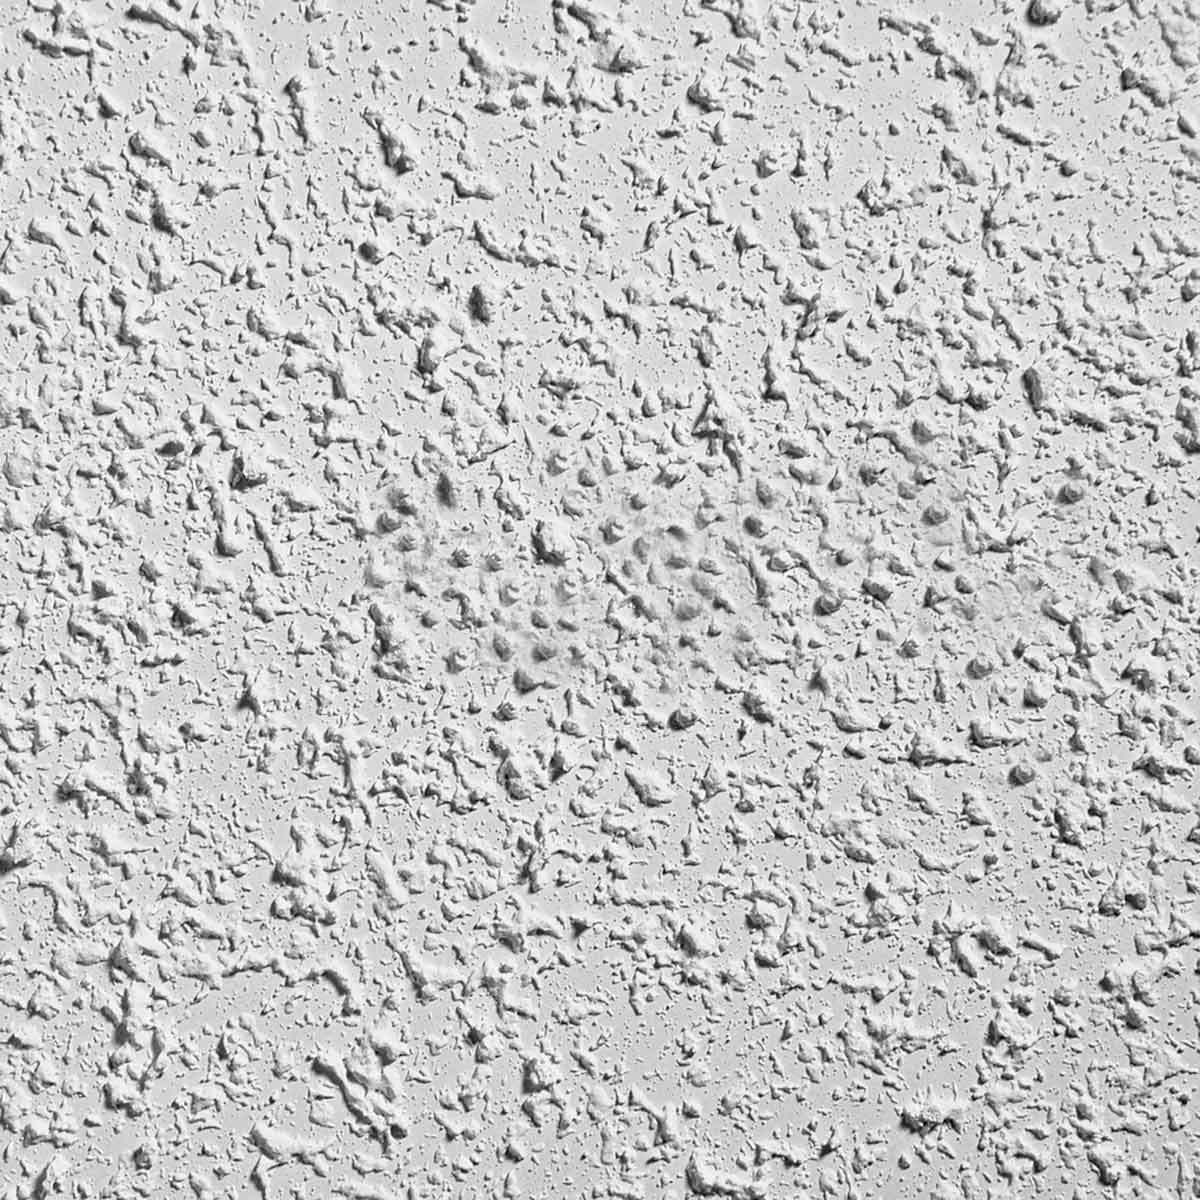 Drywall Texture Types You Need to Know | Family Handyman